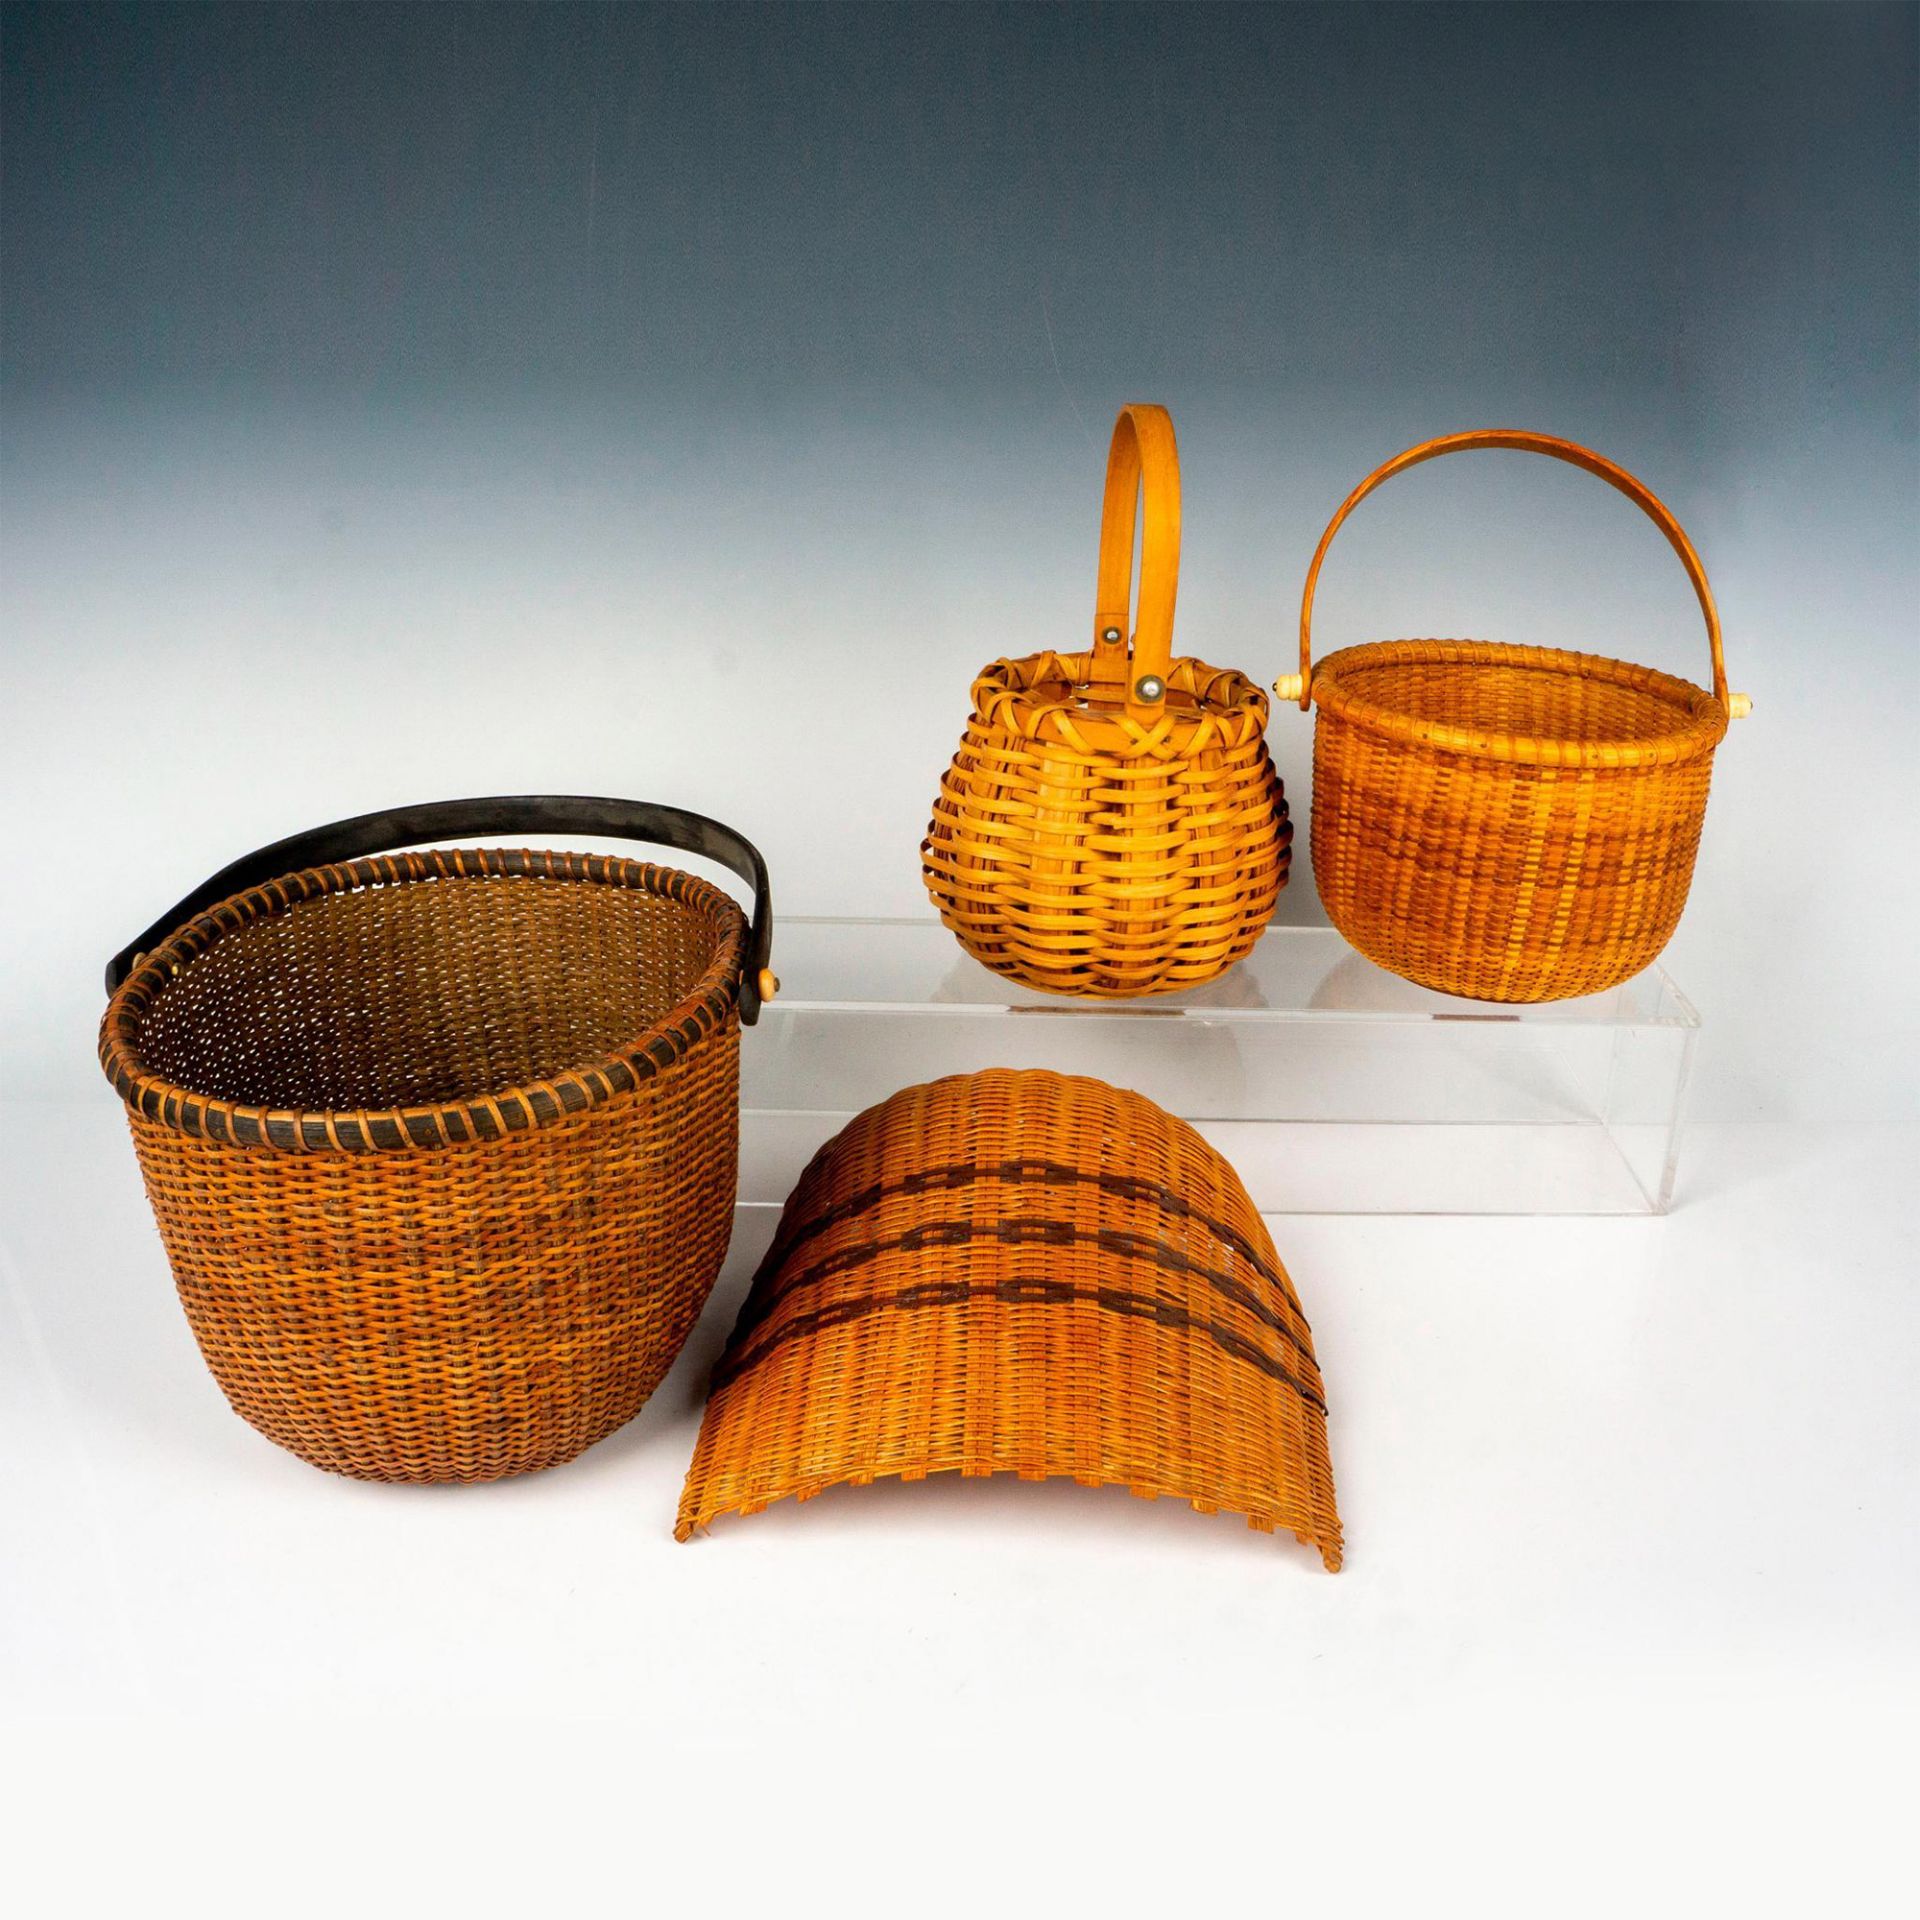 4pc Basket Grouping, Nantucket Style with Dustpan - Image 2 of 3